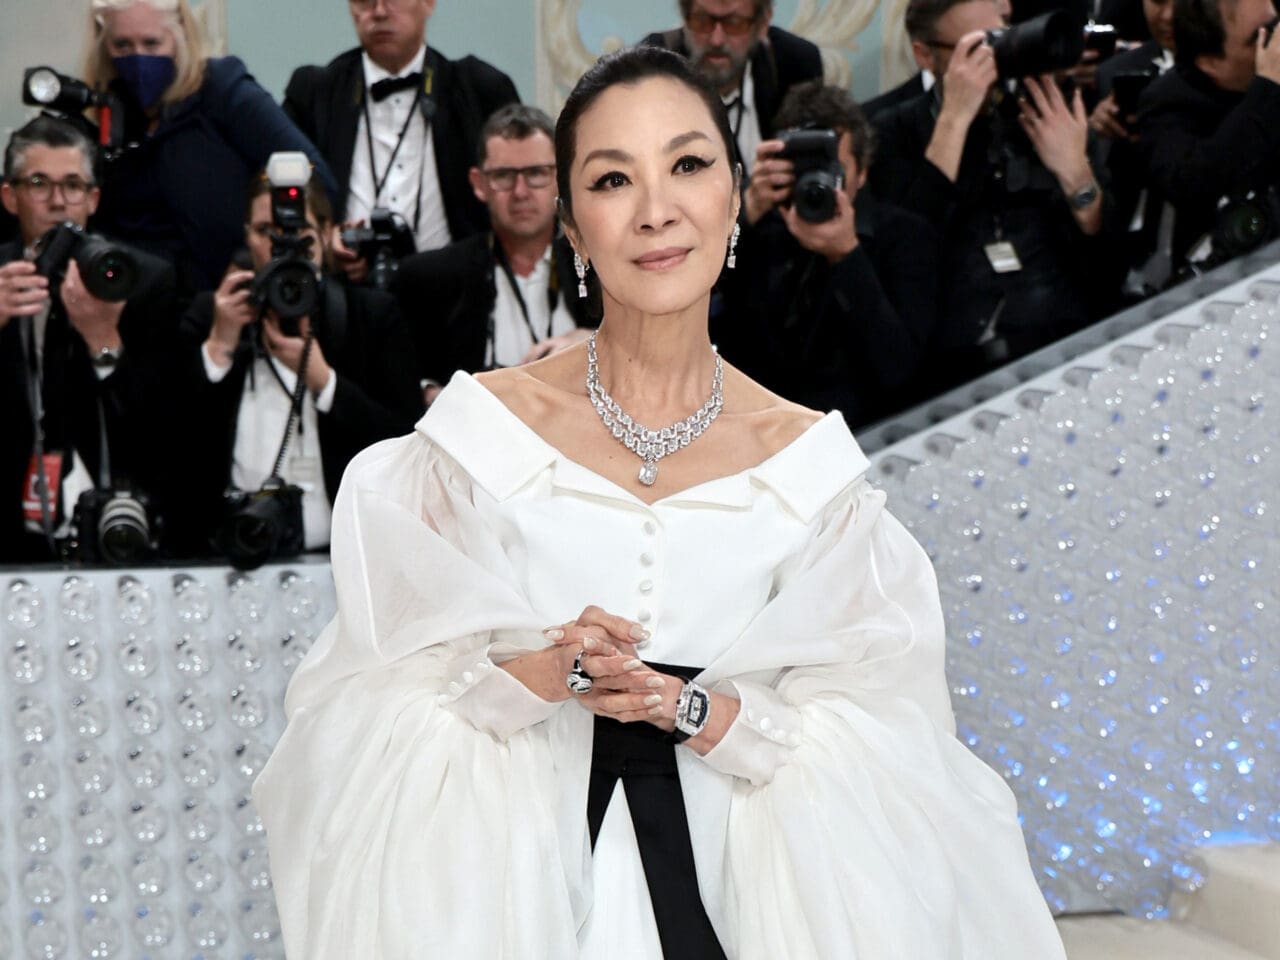 Michelle Yeoh wearing the Cartier [Sur]naturel High Jewelry necklace, and earrings in the Met Gala 2023